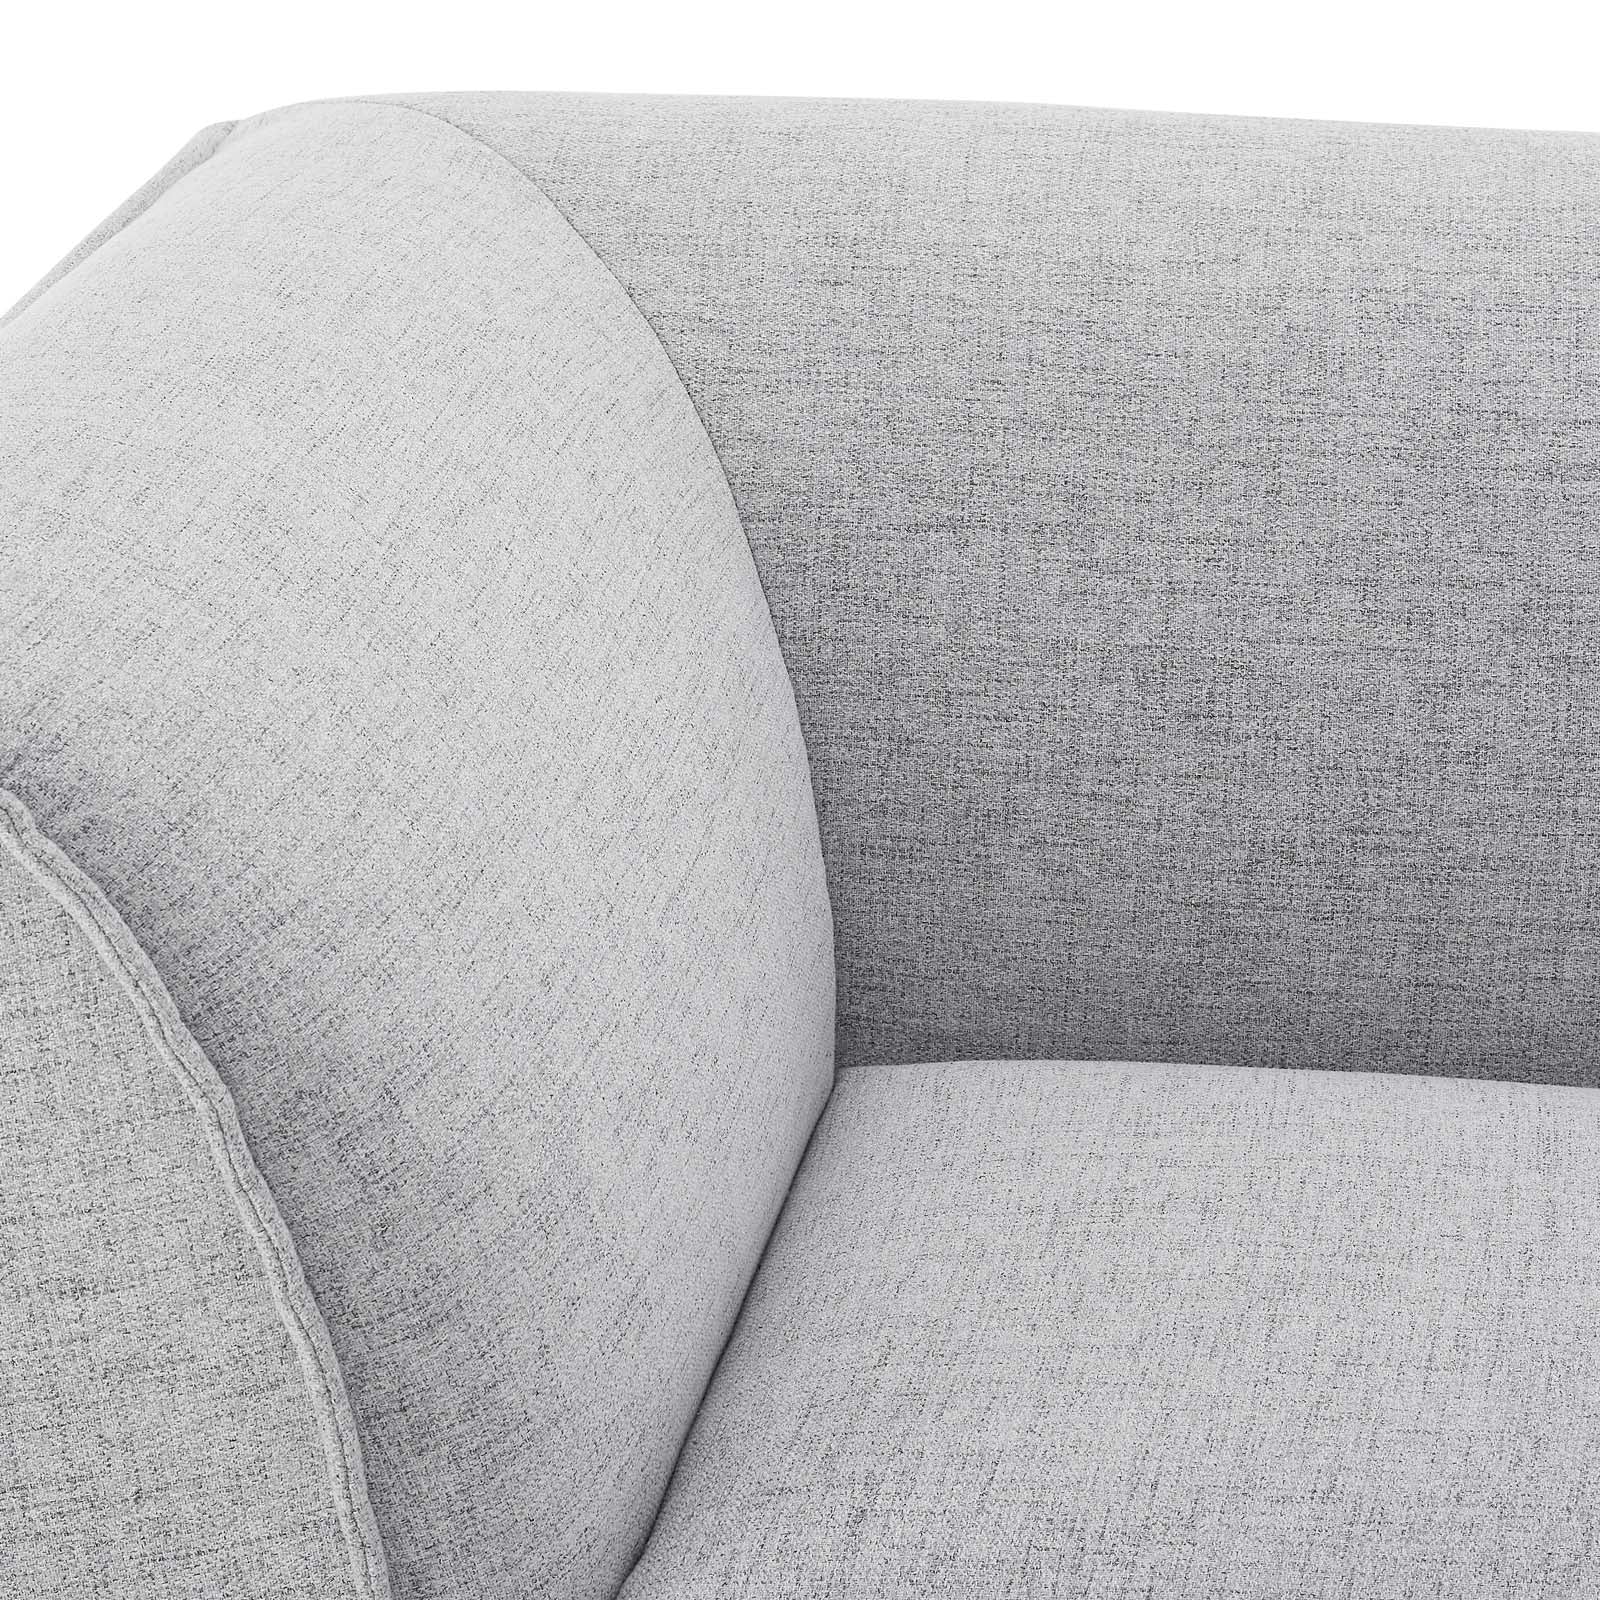 Modway Accent Chairs - Comprise Corner Sectional Sofa Chair Light Gray